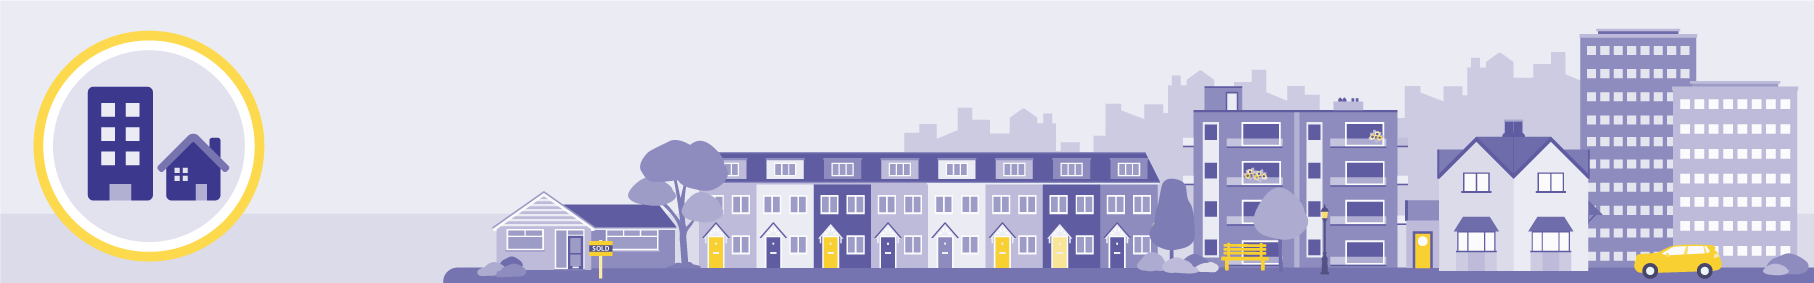 A graphic showing a street with a symbol representing housing on the left-hand side